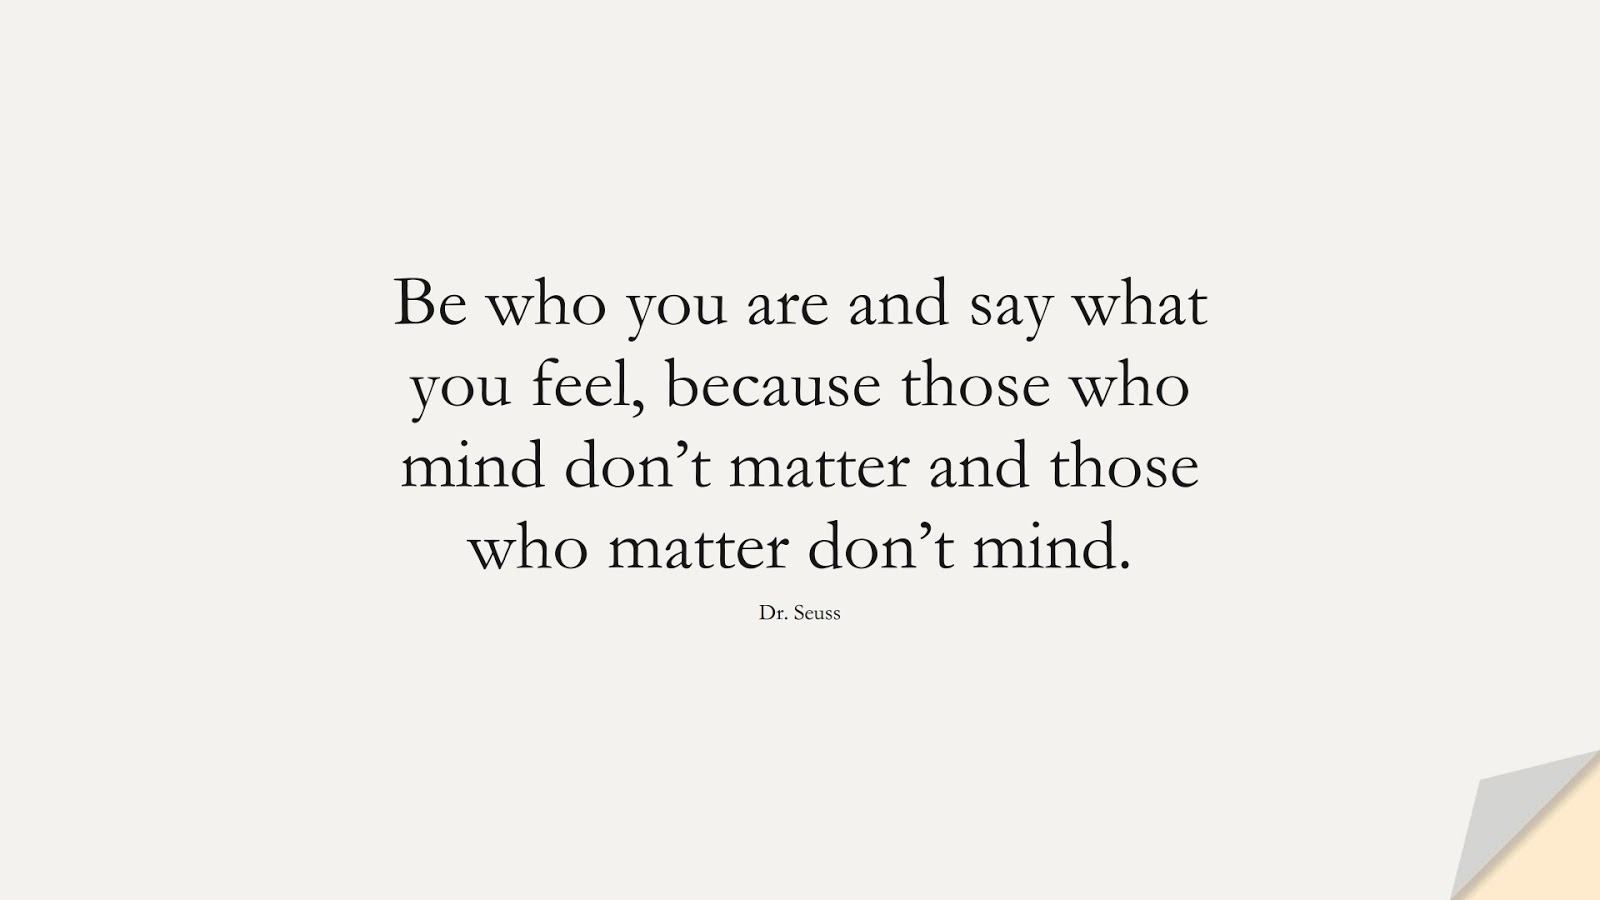 Be who you are and say what you feel, because those who mind don’t matter and those who matter don’t mind. (Dr. Seuss);  #BeYourselfQuotes